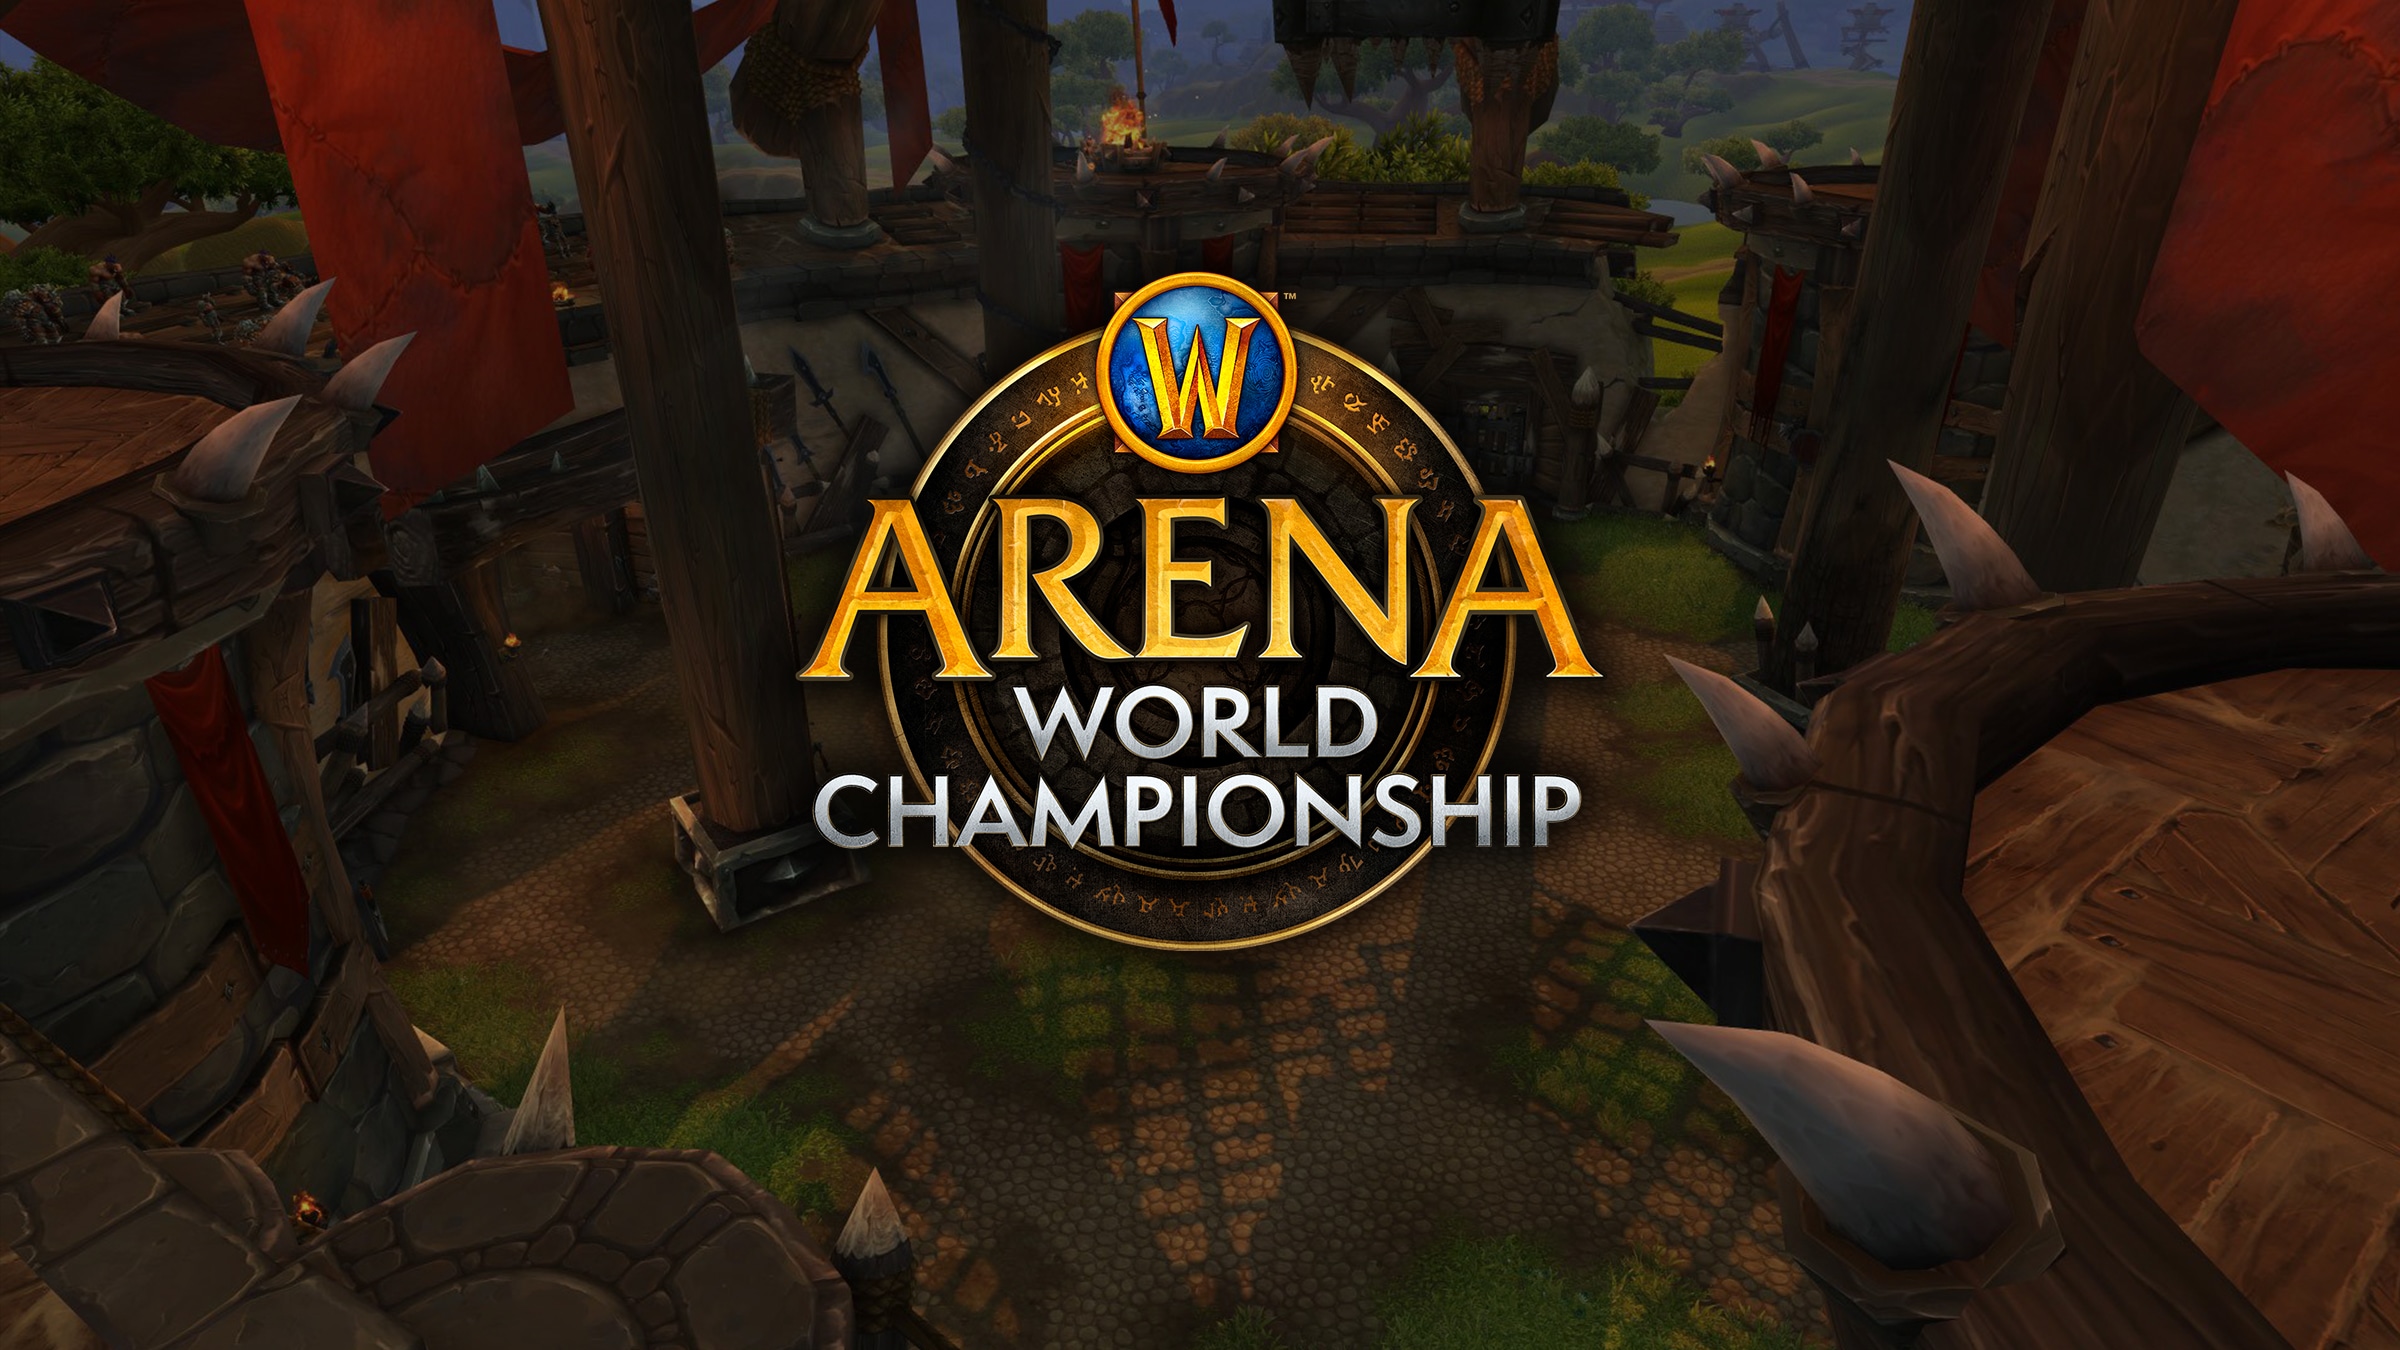 Tune In June 9–10 for the WoW Arena World Championship: European Qualifier Cup 3